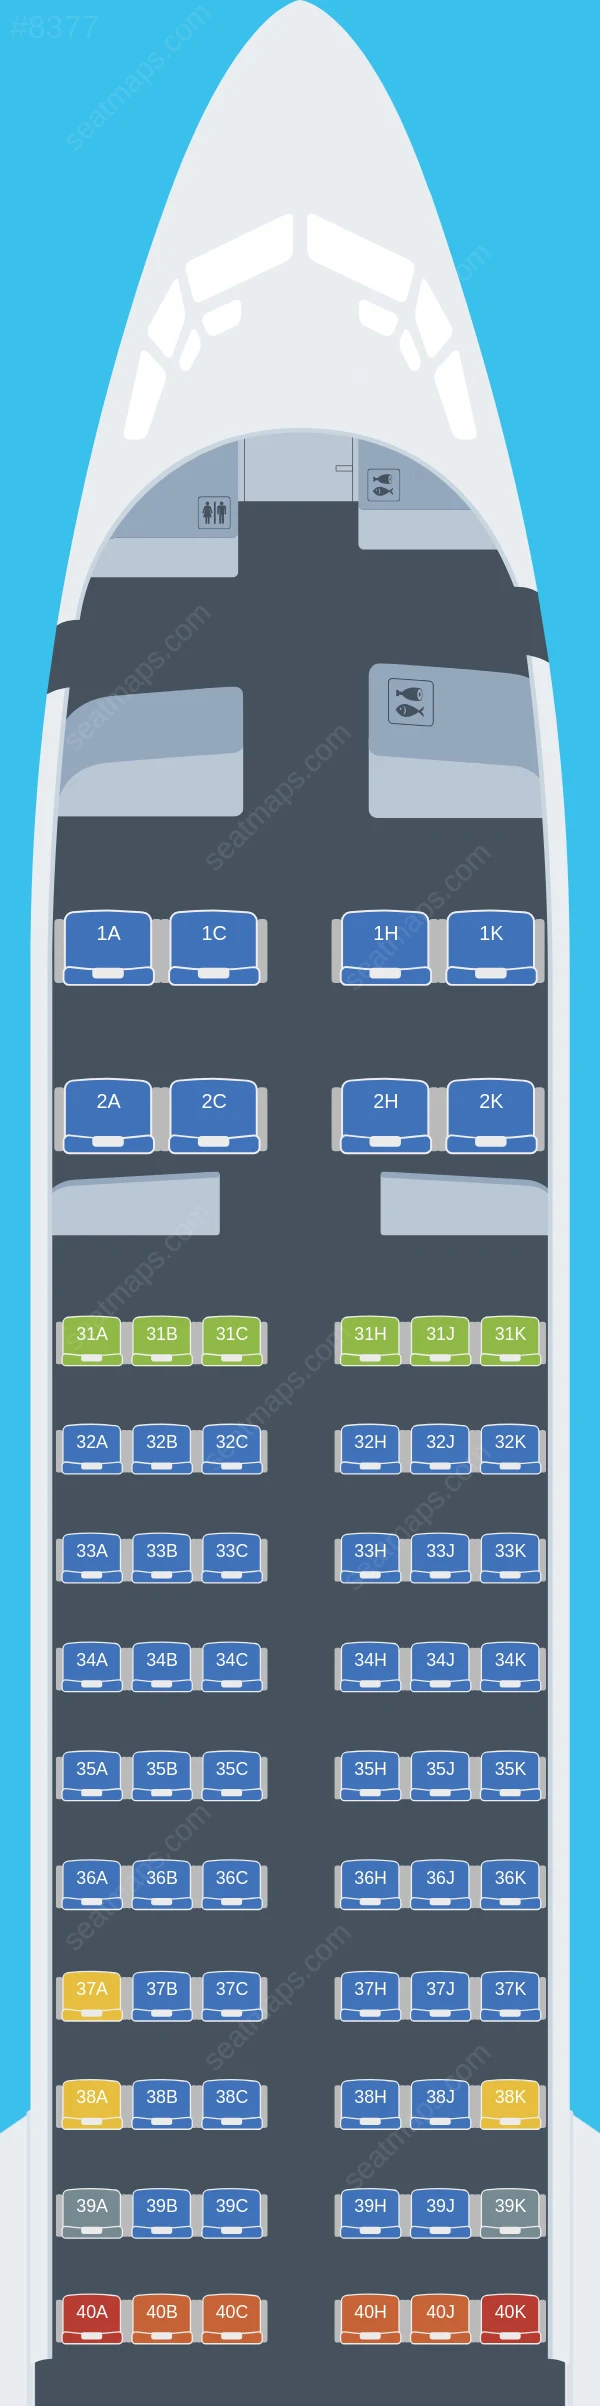 Hainan Airlines Boeing 737 MAX 8 seatmap preview